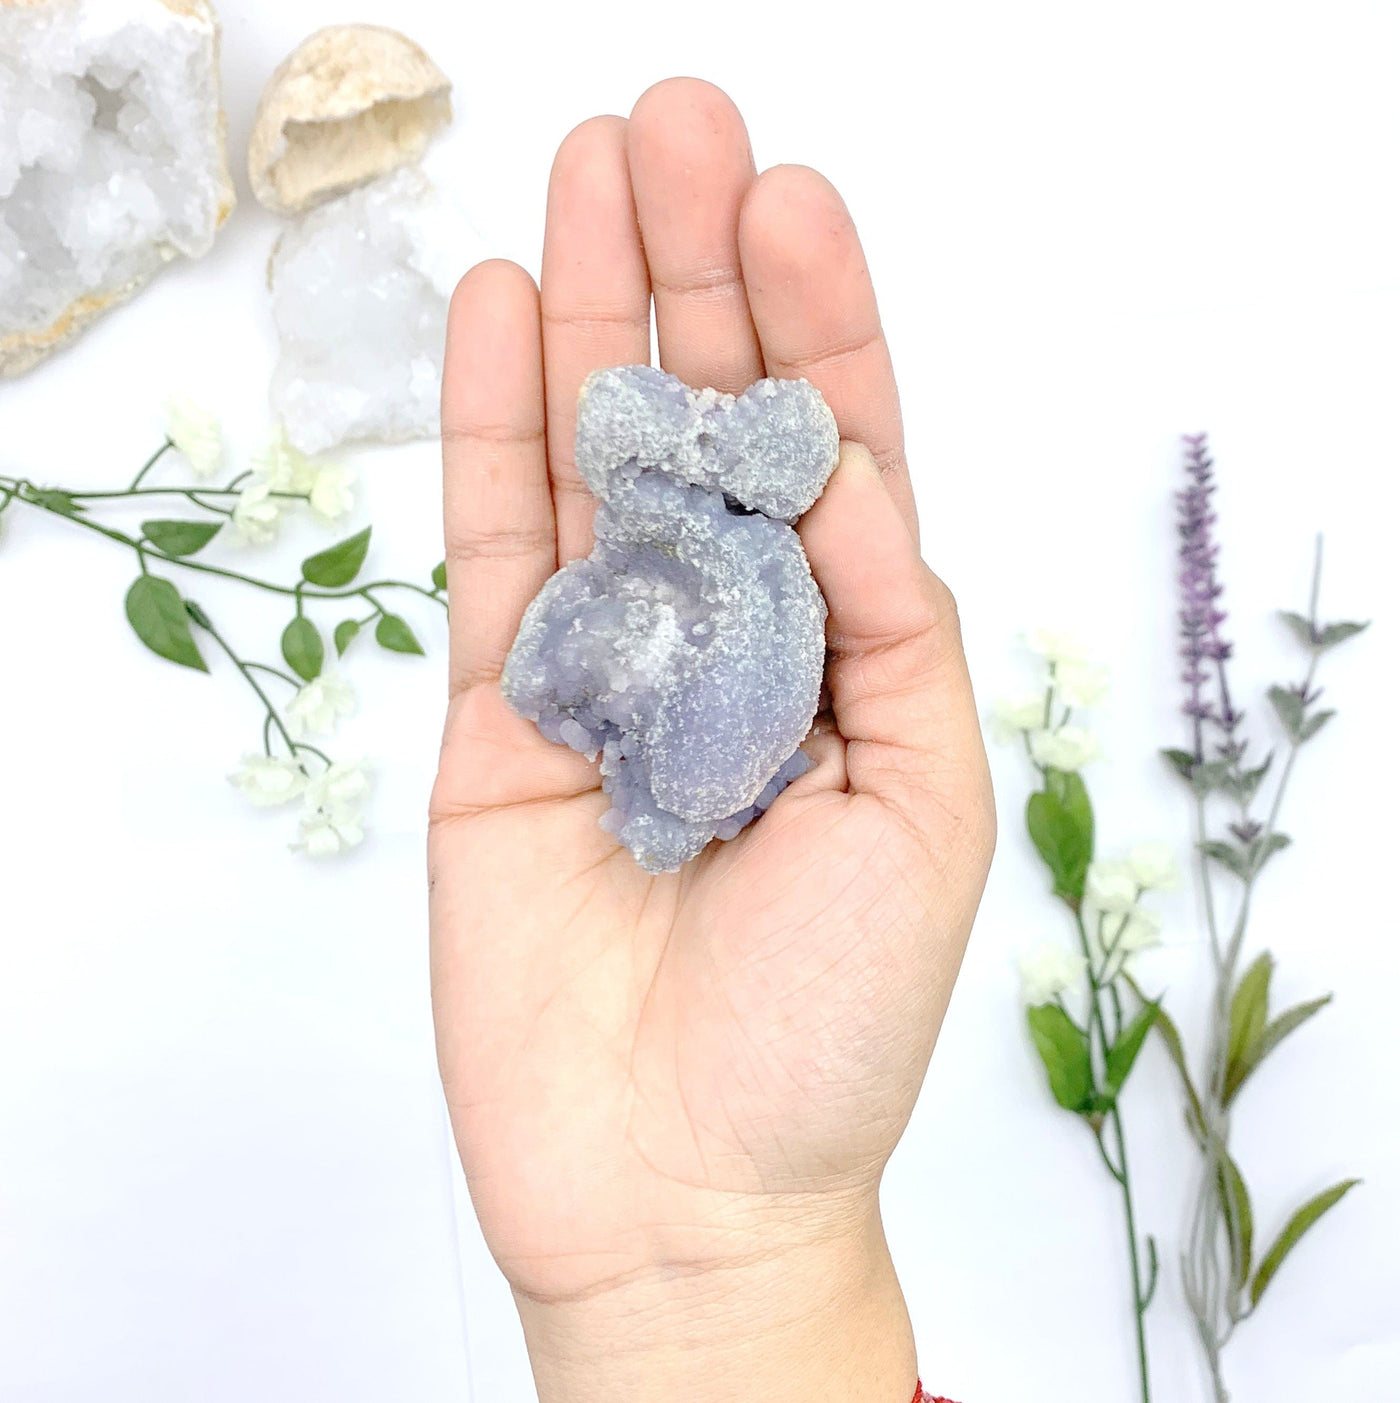 hand holding up Grape Agate Mineral with decorations in the background